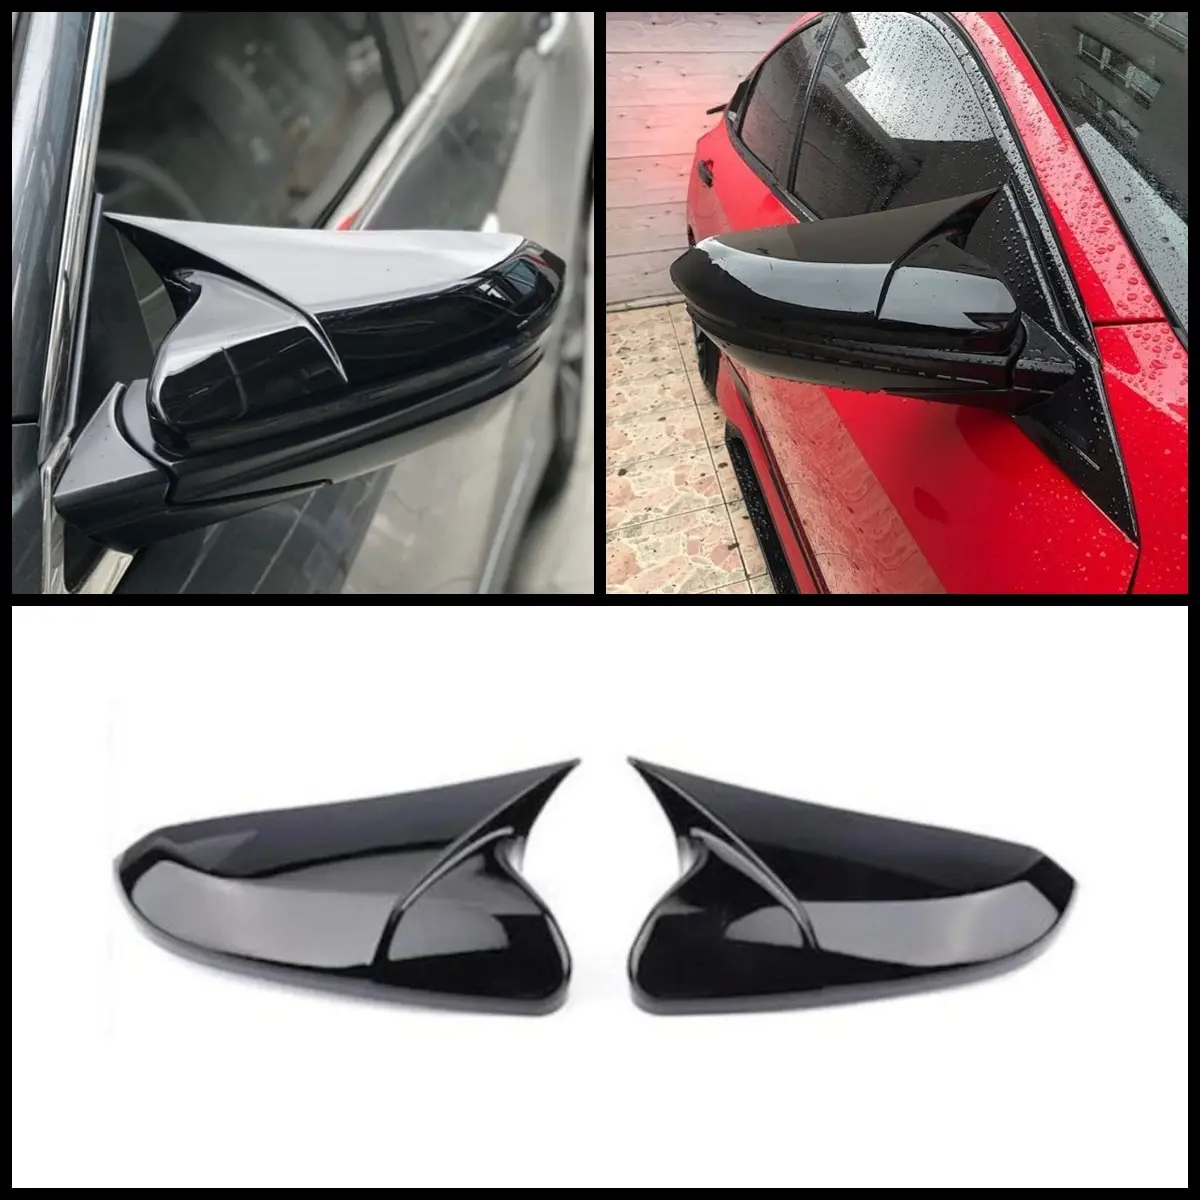 2 Pieces Rearview Mirror Cover For Honda Civic FC5 FK7 FK8 10th gen Side Wing RearView Mirror Case Cover Glossy black Accessory